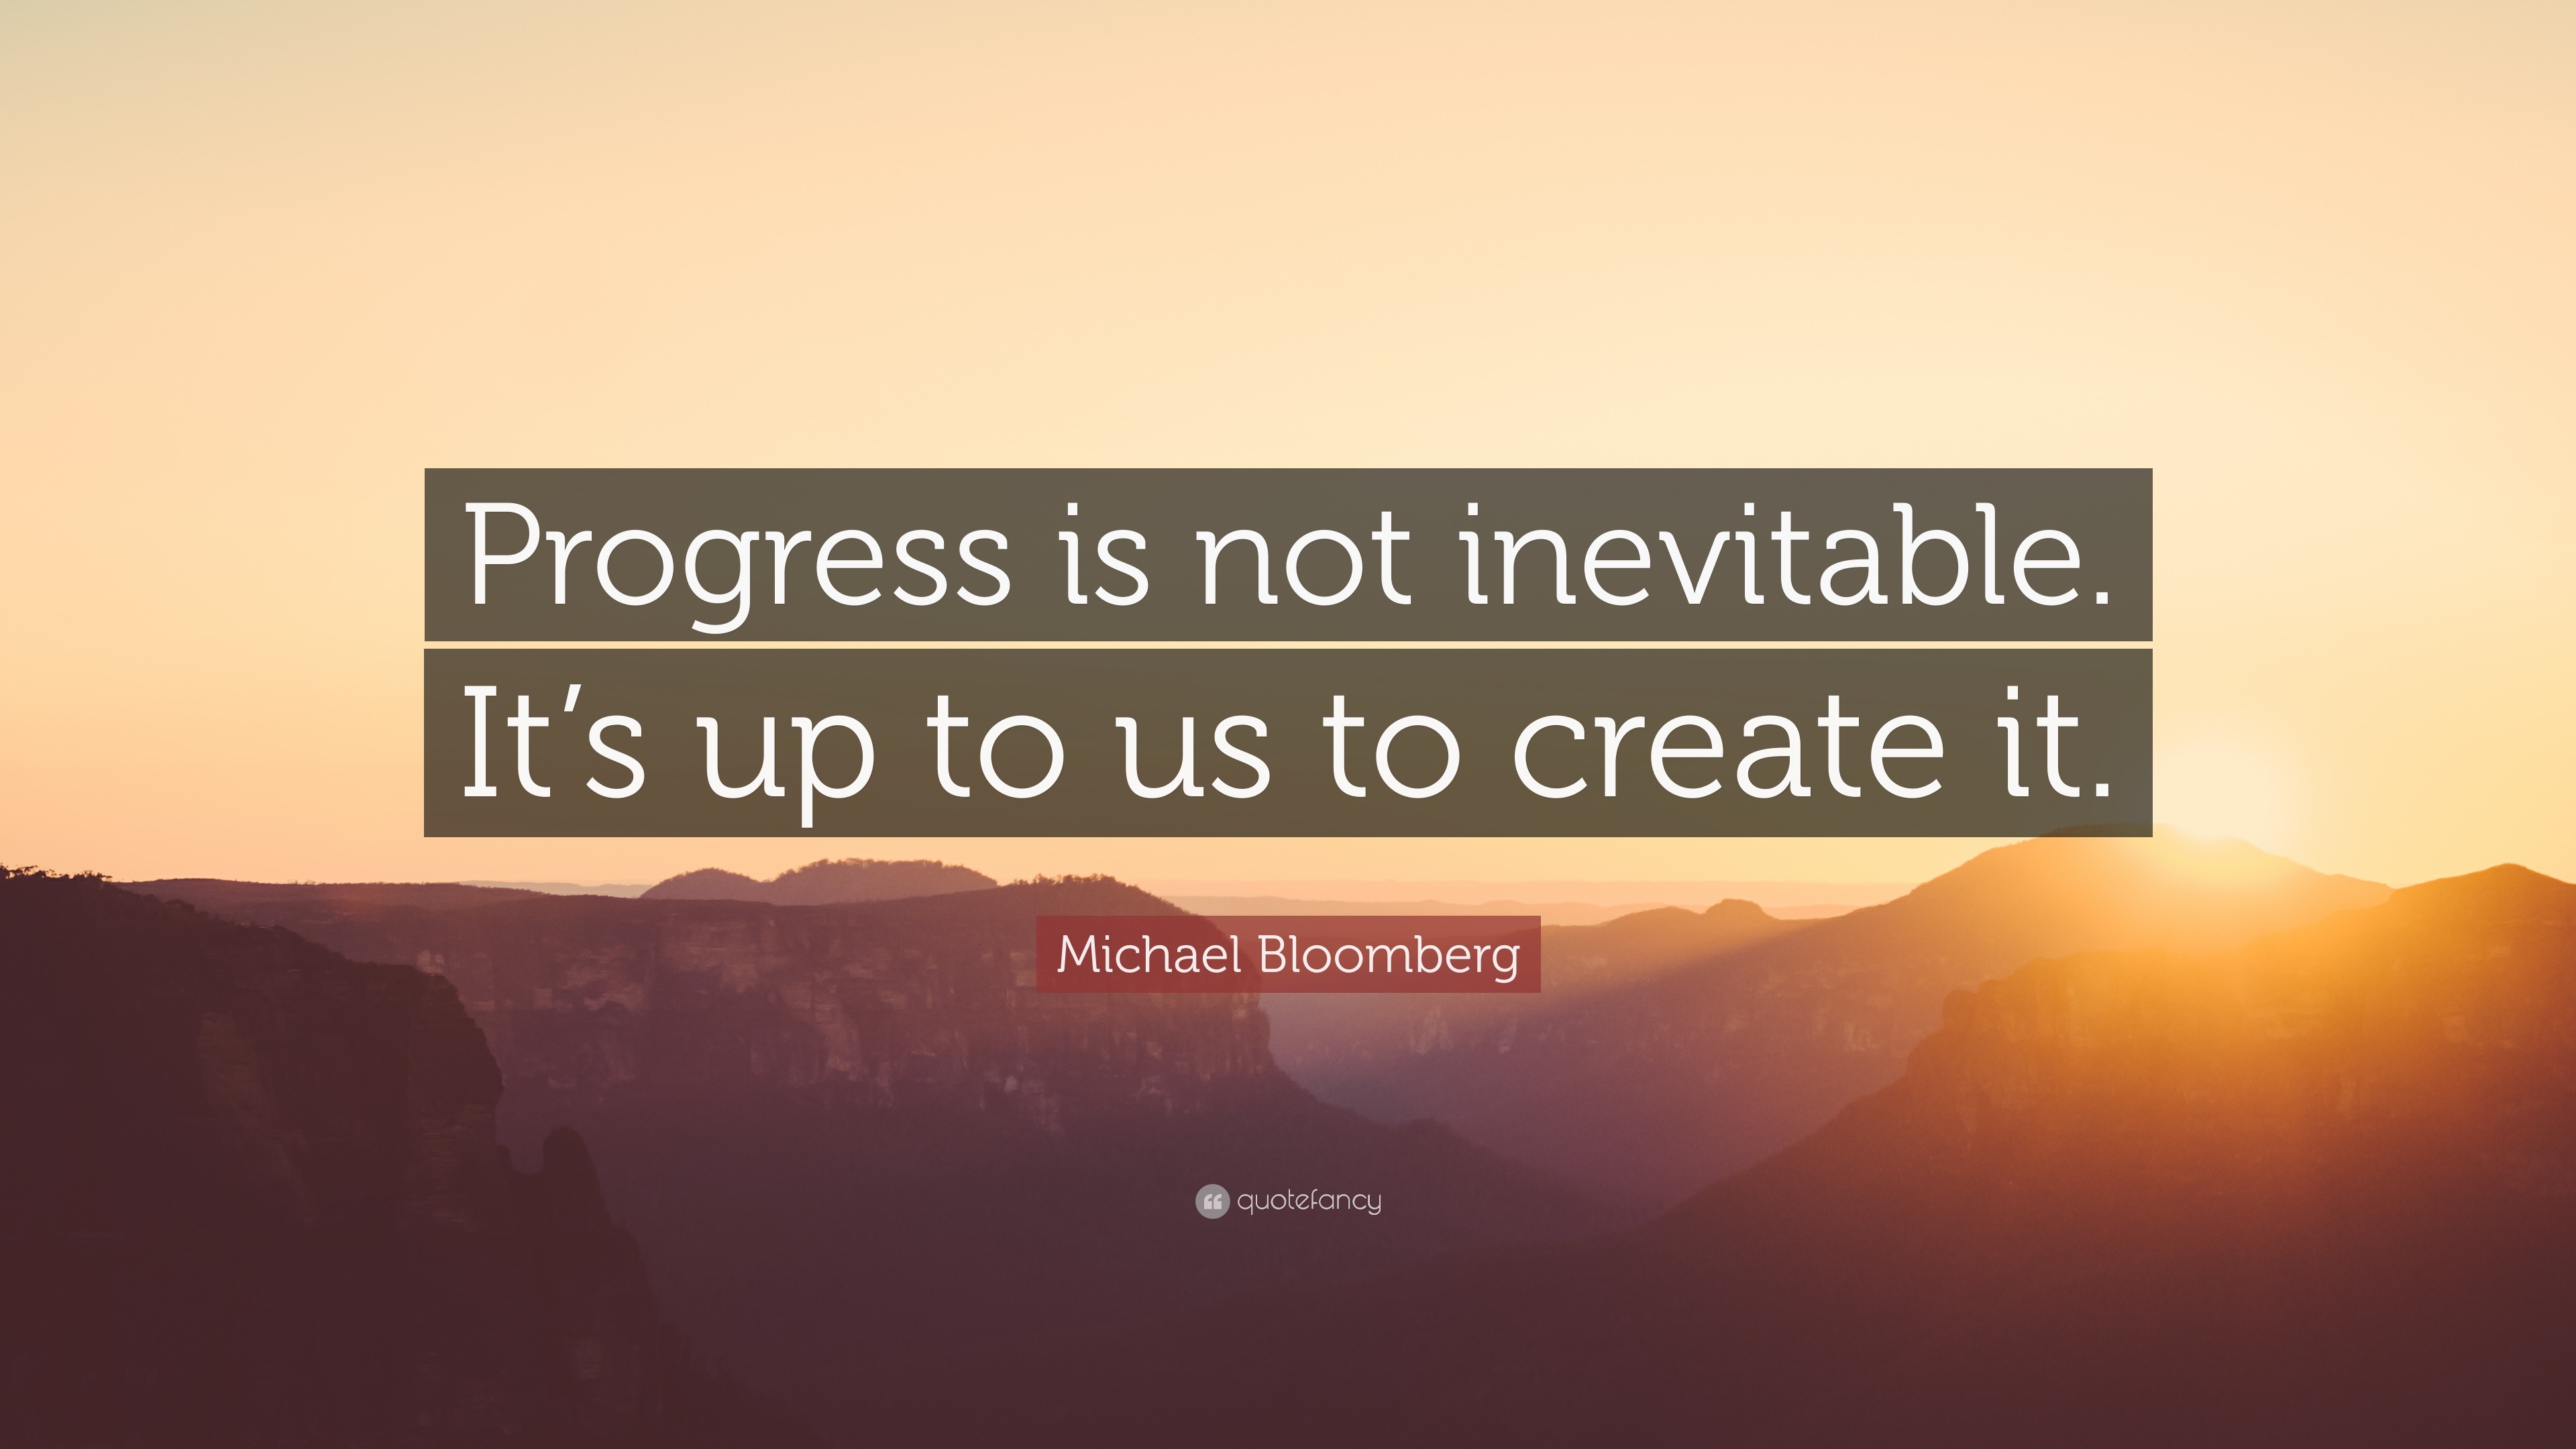 Michael Bloomberg Quote: “Progress is not inevitable. It’s up to us to ...